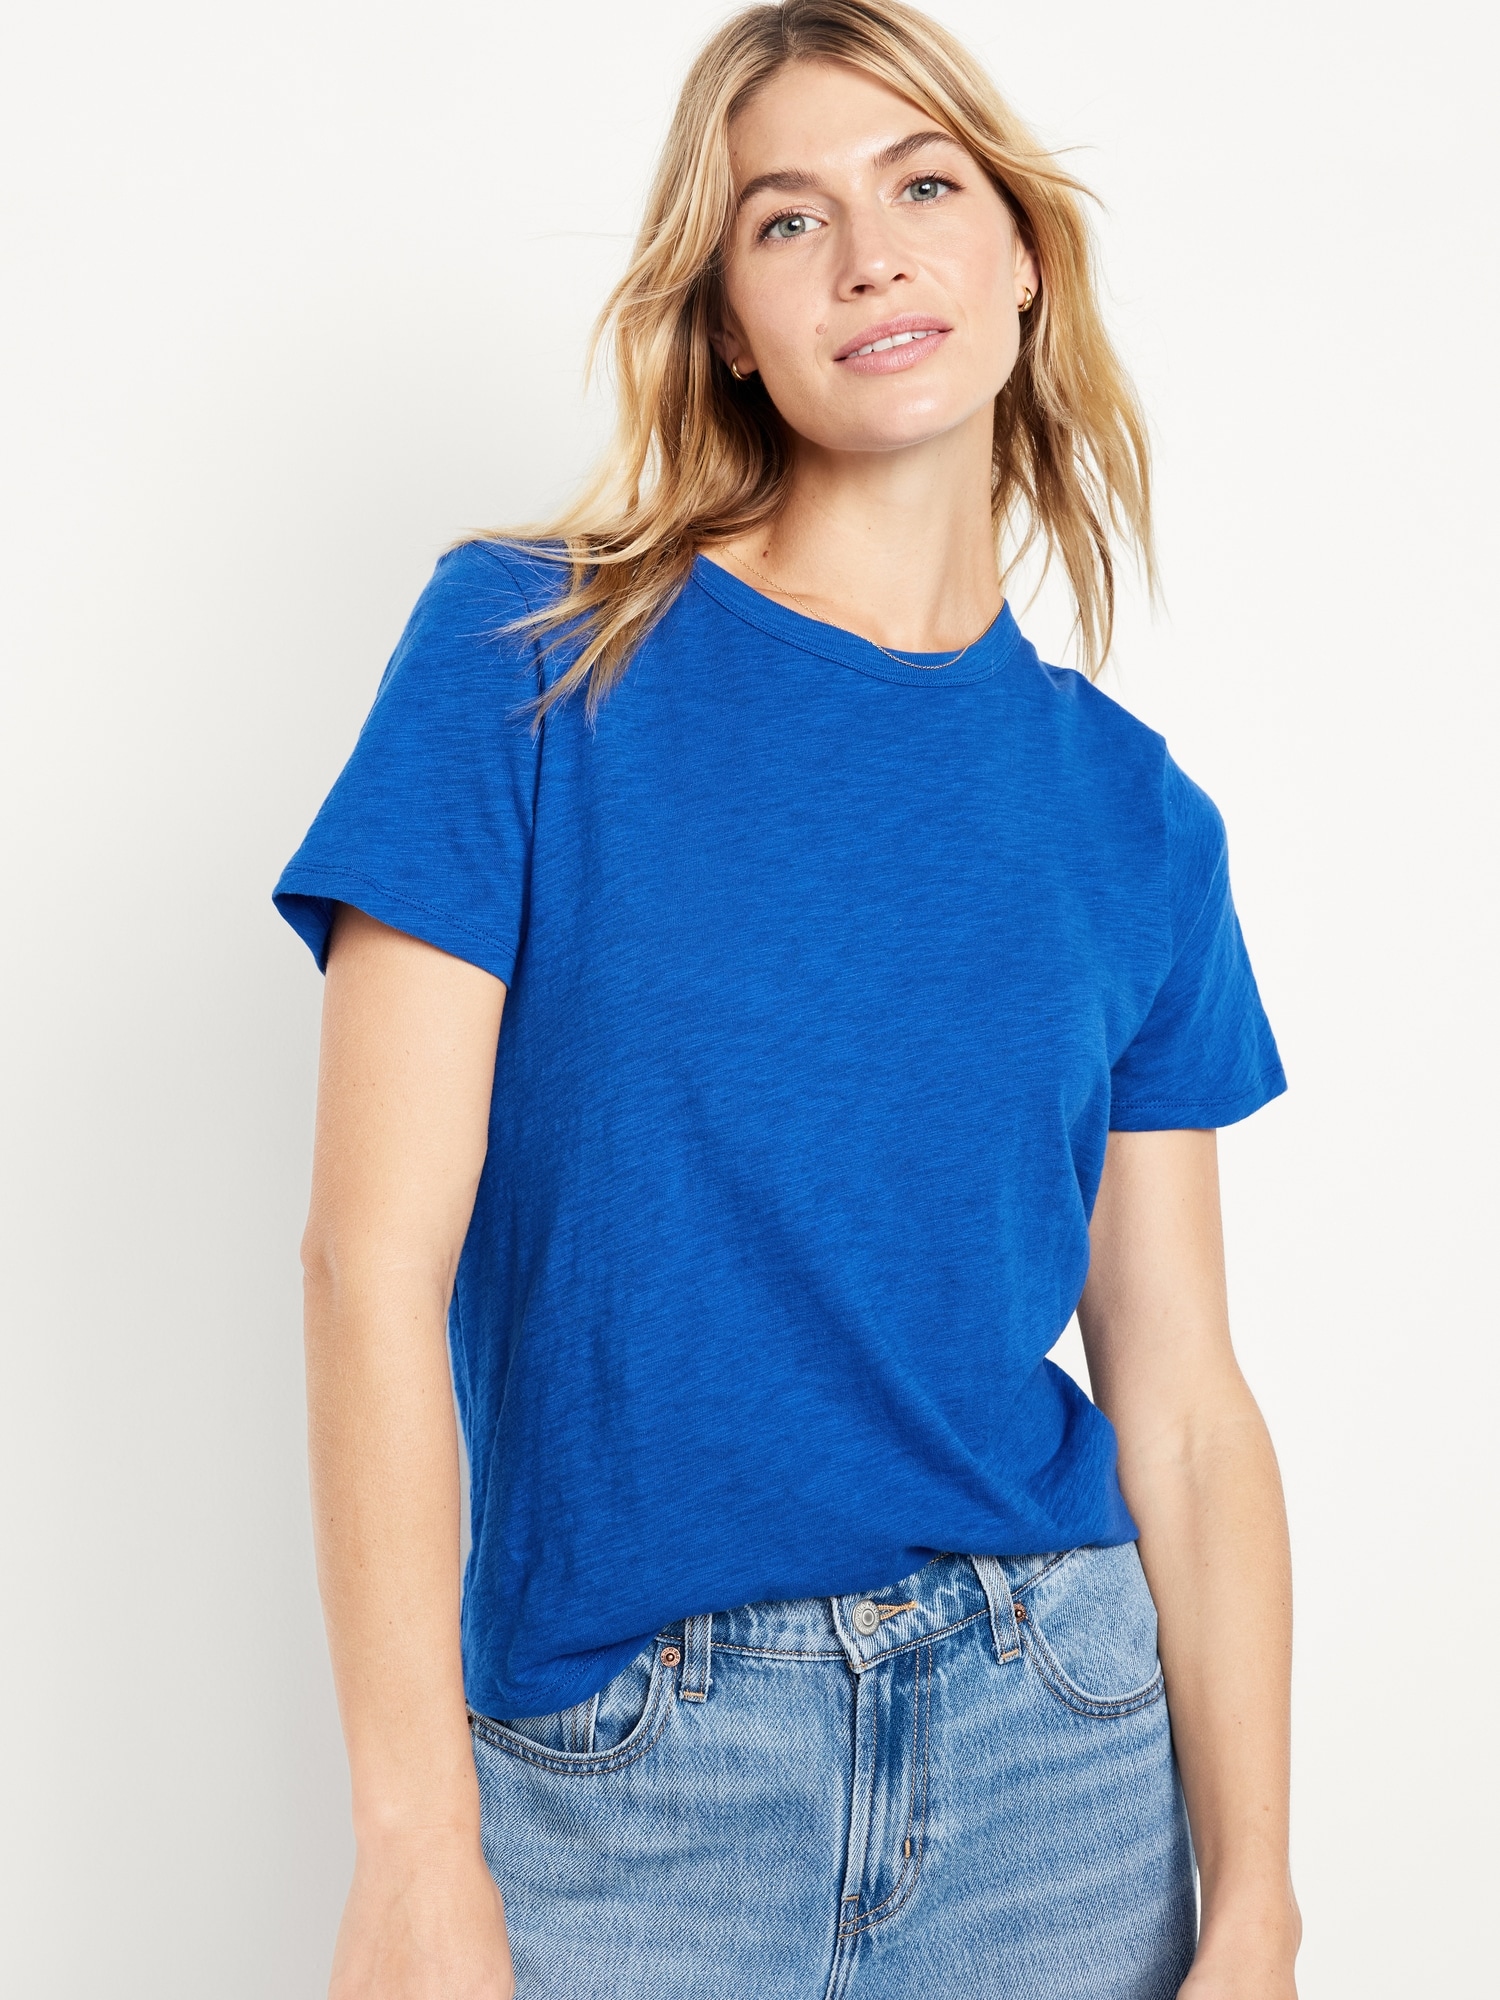 Old Navy #NeverBasic Tees // 3 Different Outfits — bows & sequins